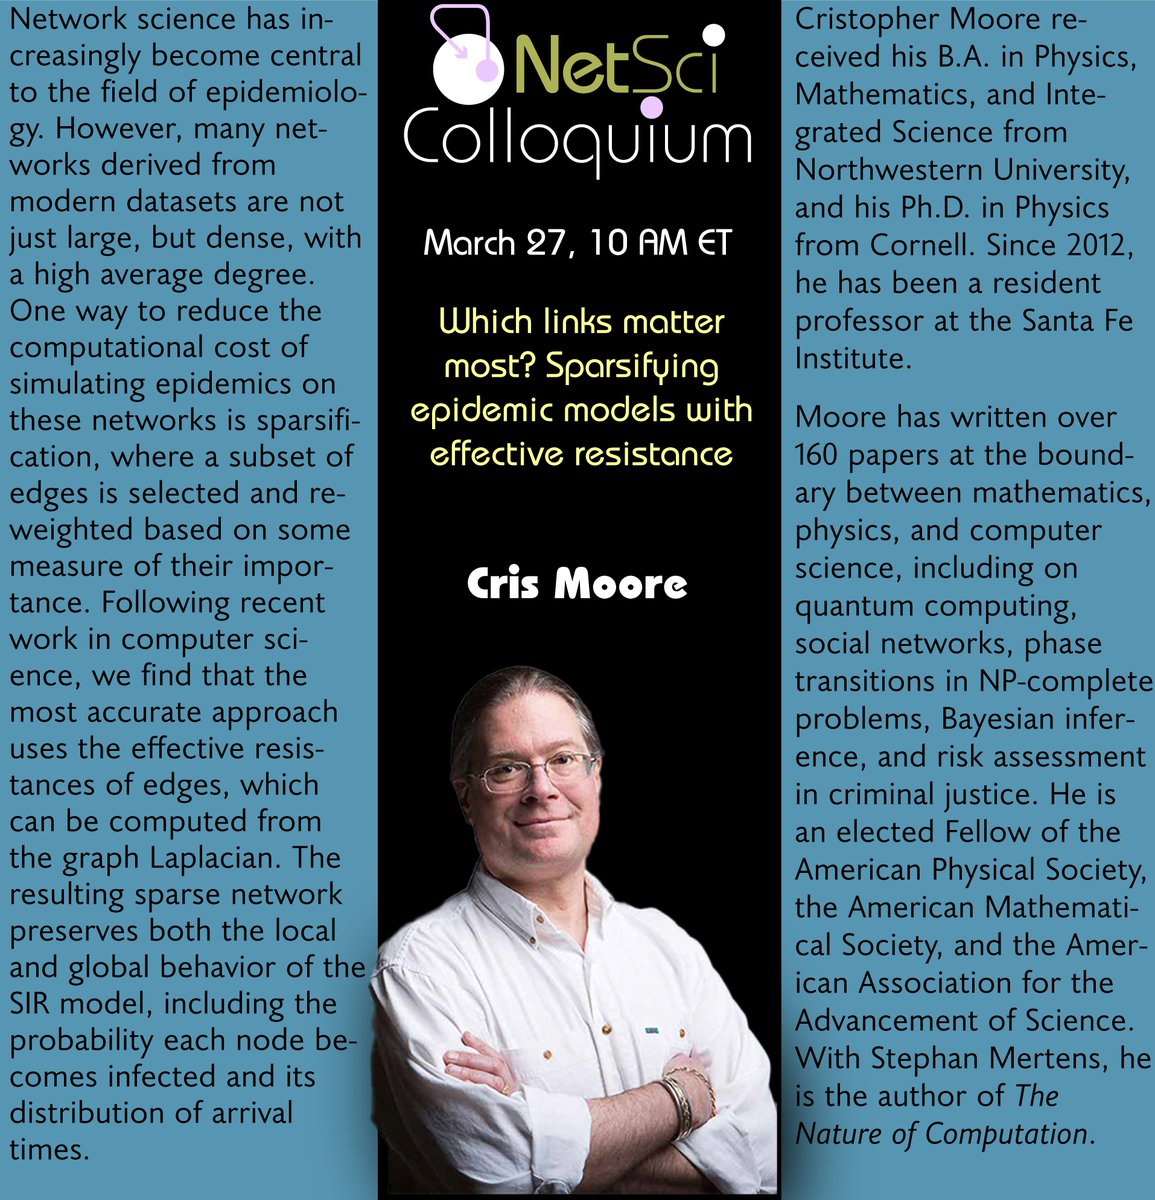 Next on the colloquium stage, the legendary Cris Moore! Cancel your meetings for March 27 and sign up at iu.zoom.us/webinar/regist…